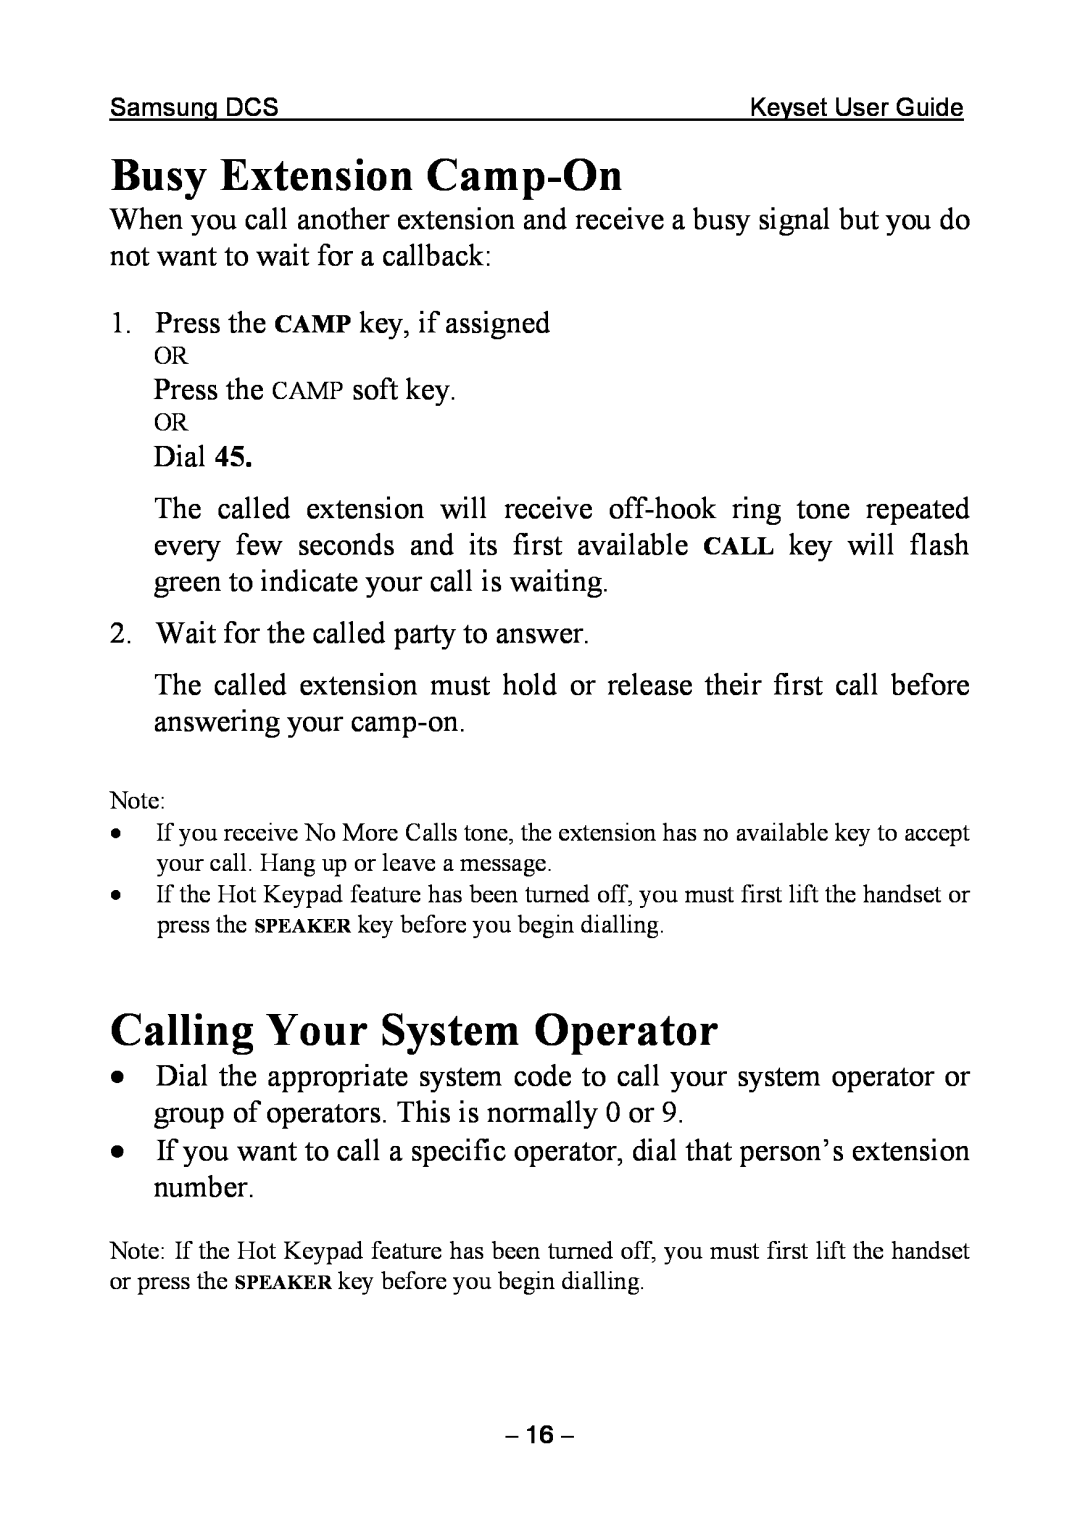 Samsung DCS KEYSET manual Busy Extension Camp-On, Calling Your System Operator 